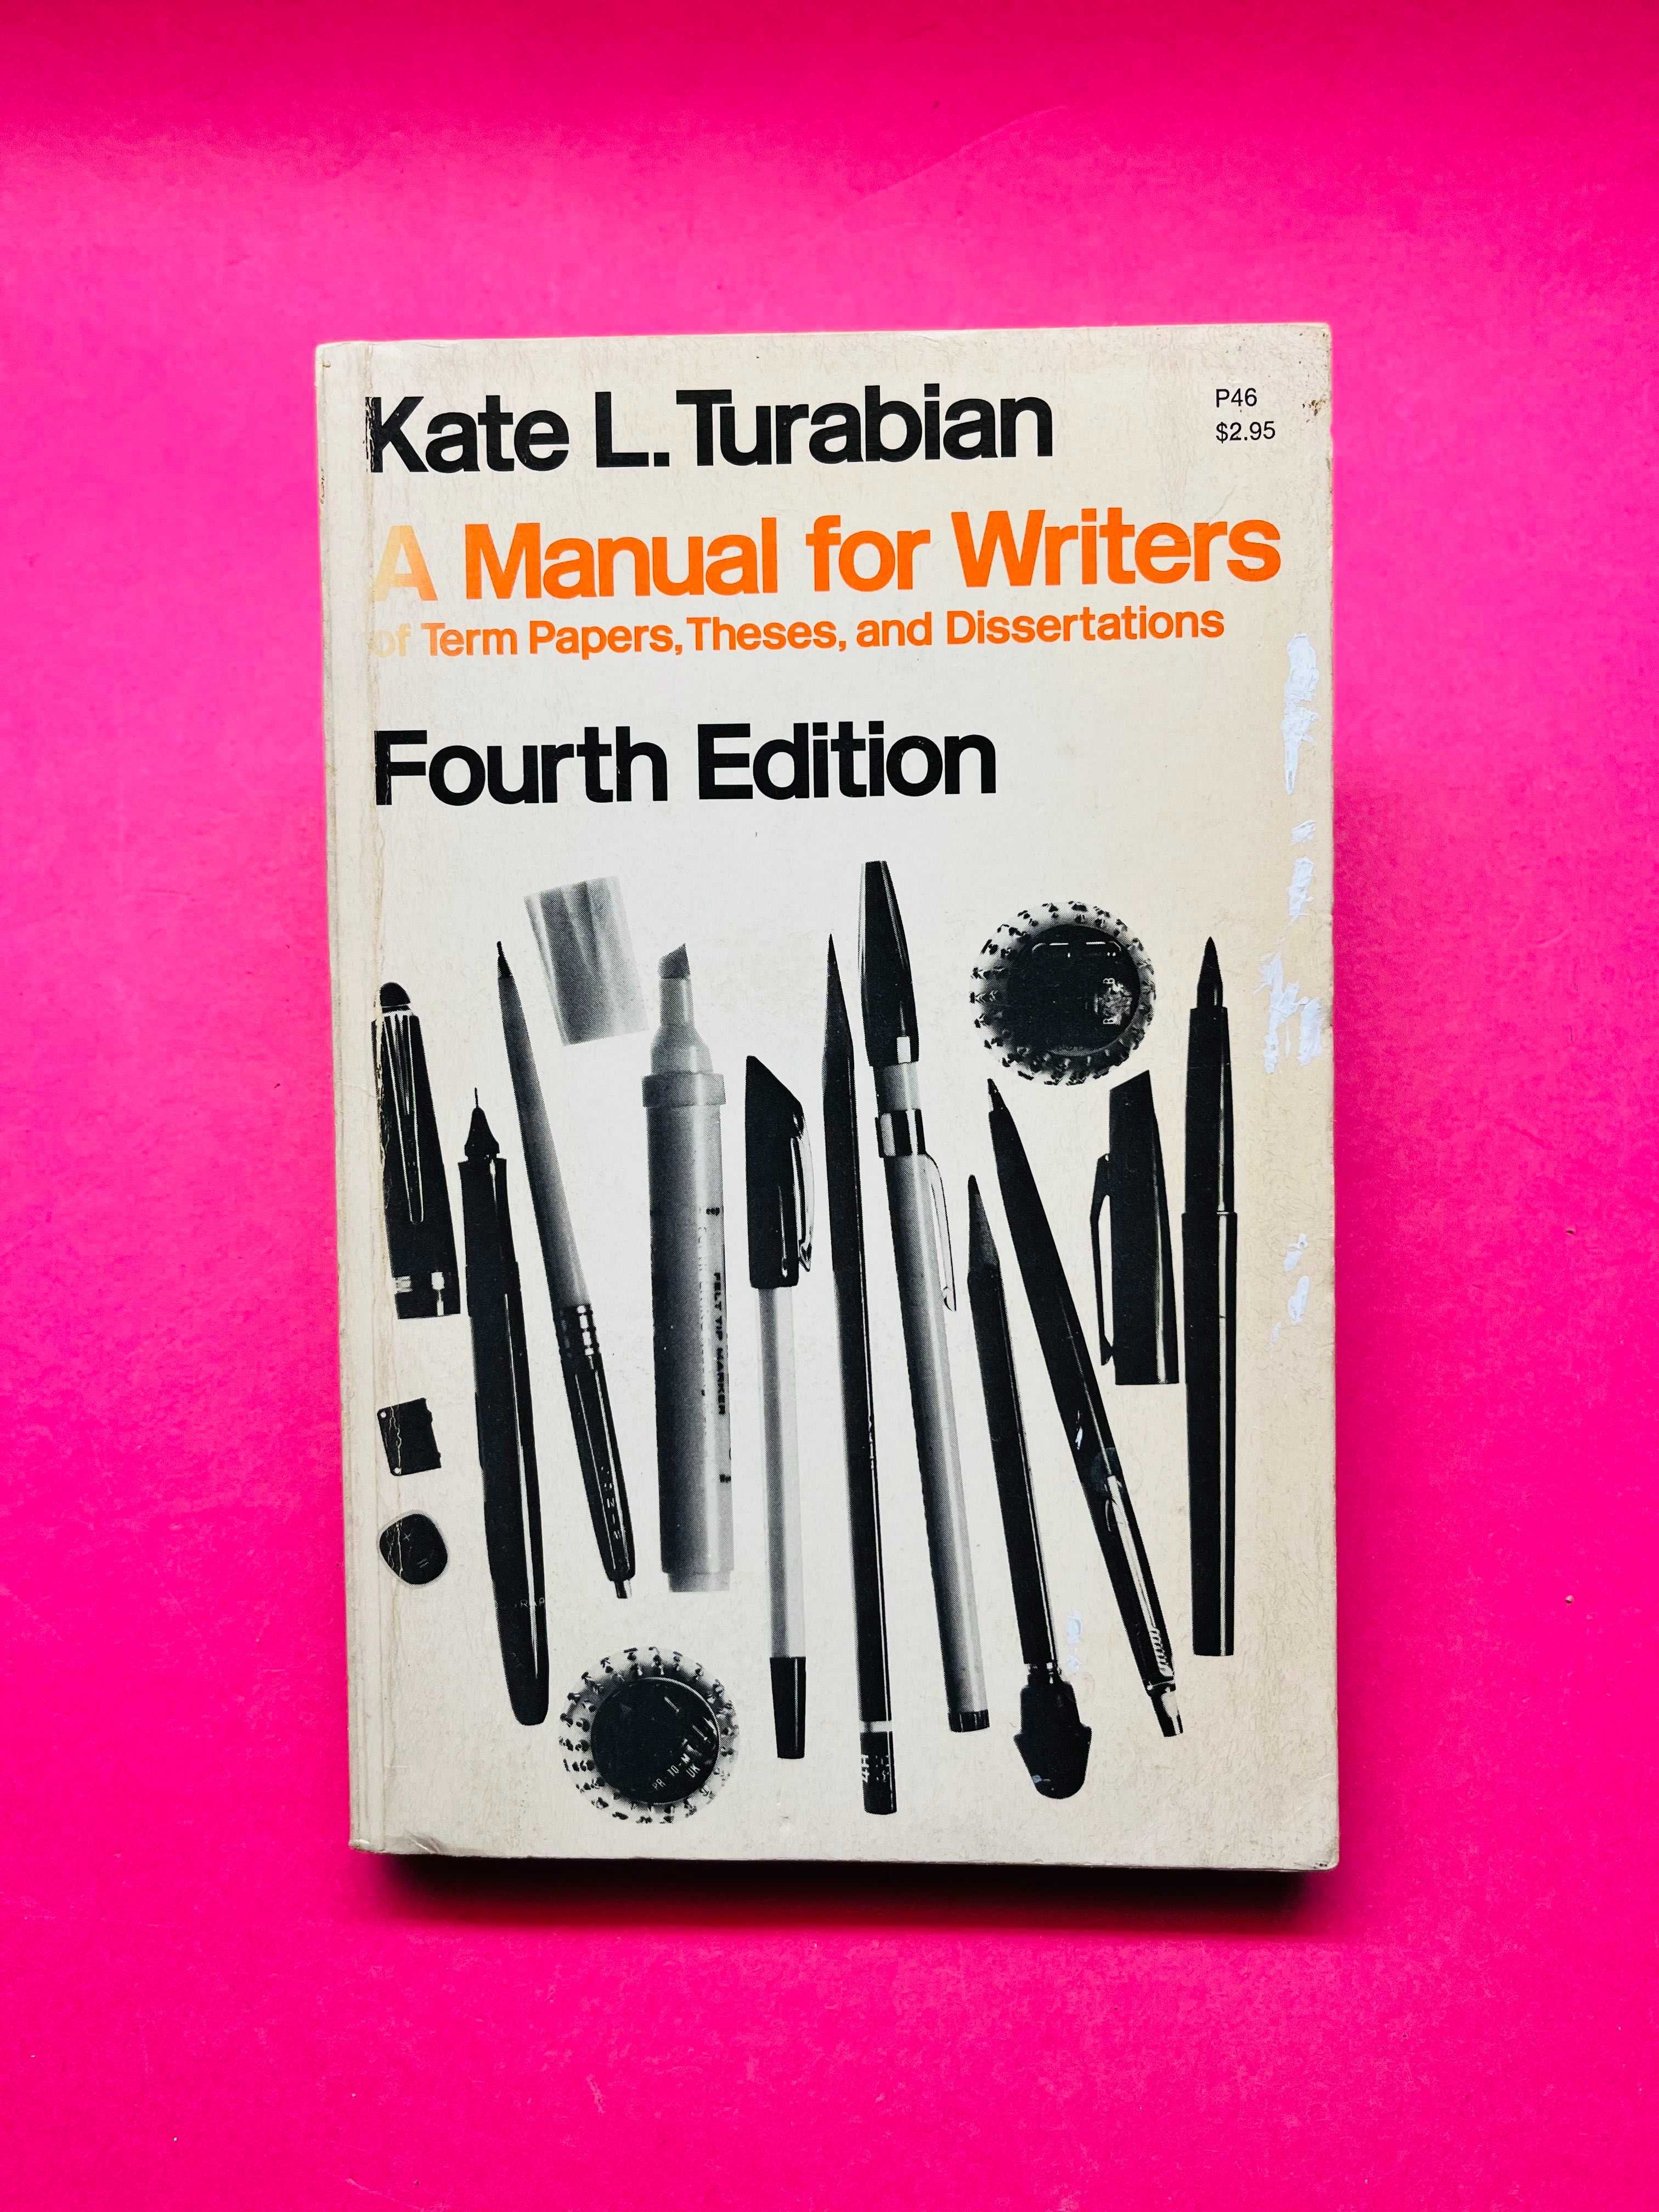 A Manual for Writers - Kate L. Turabian